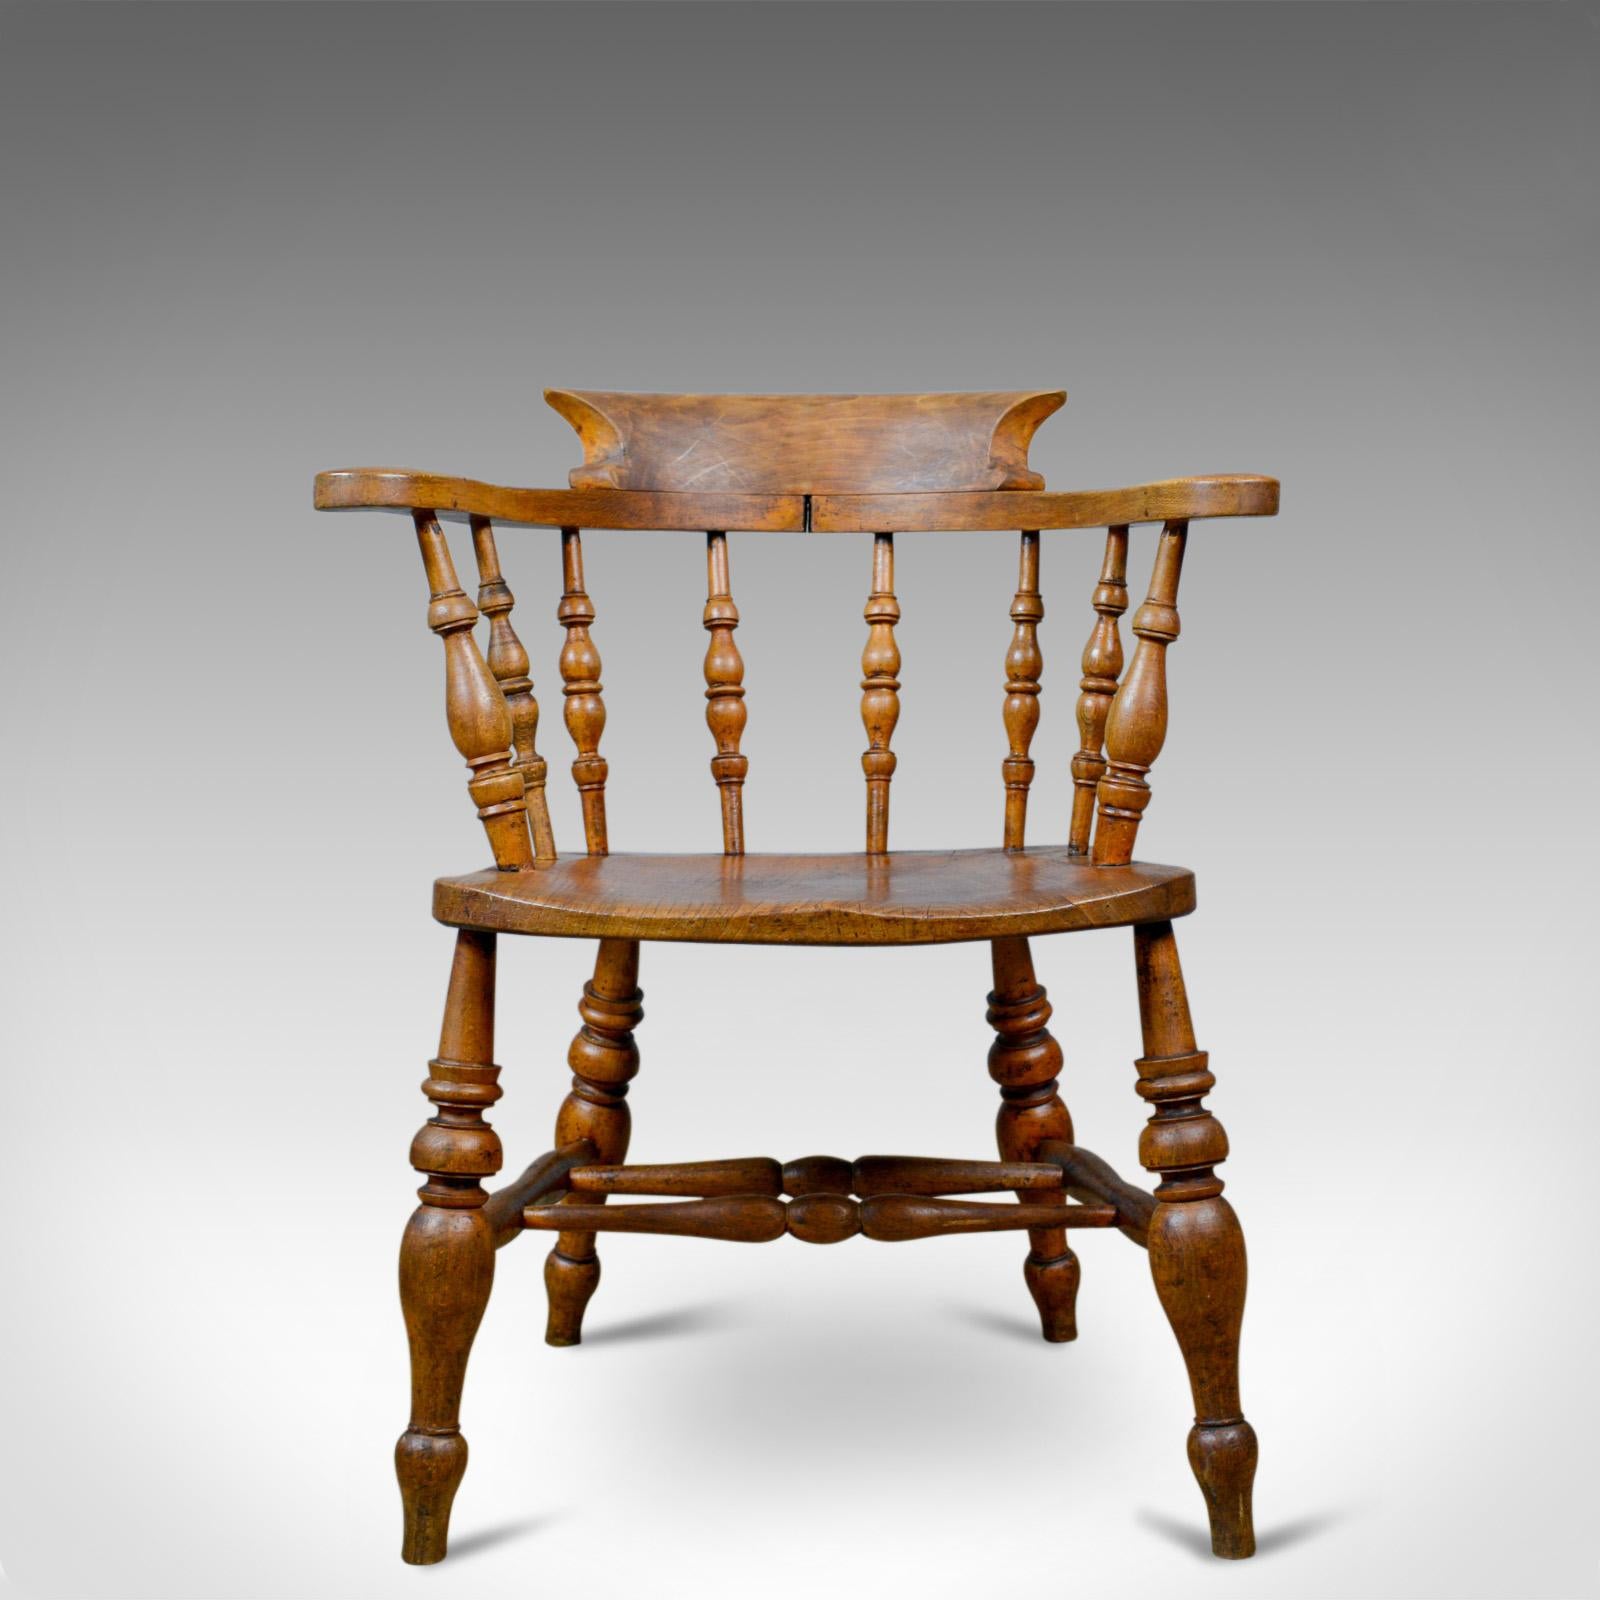 This is an antique bow-back elbow chair. An English, Victorian, elm, 'smokers', or 'captains', chair dating to circa 1890.

An appealing country kitchen, bow back armchair
Grain interest in a wax polished finish
Solid and stabile offering a